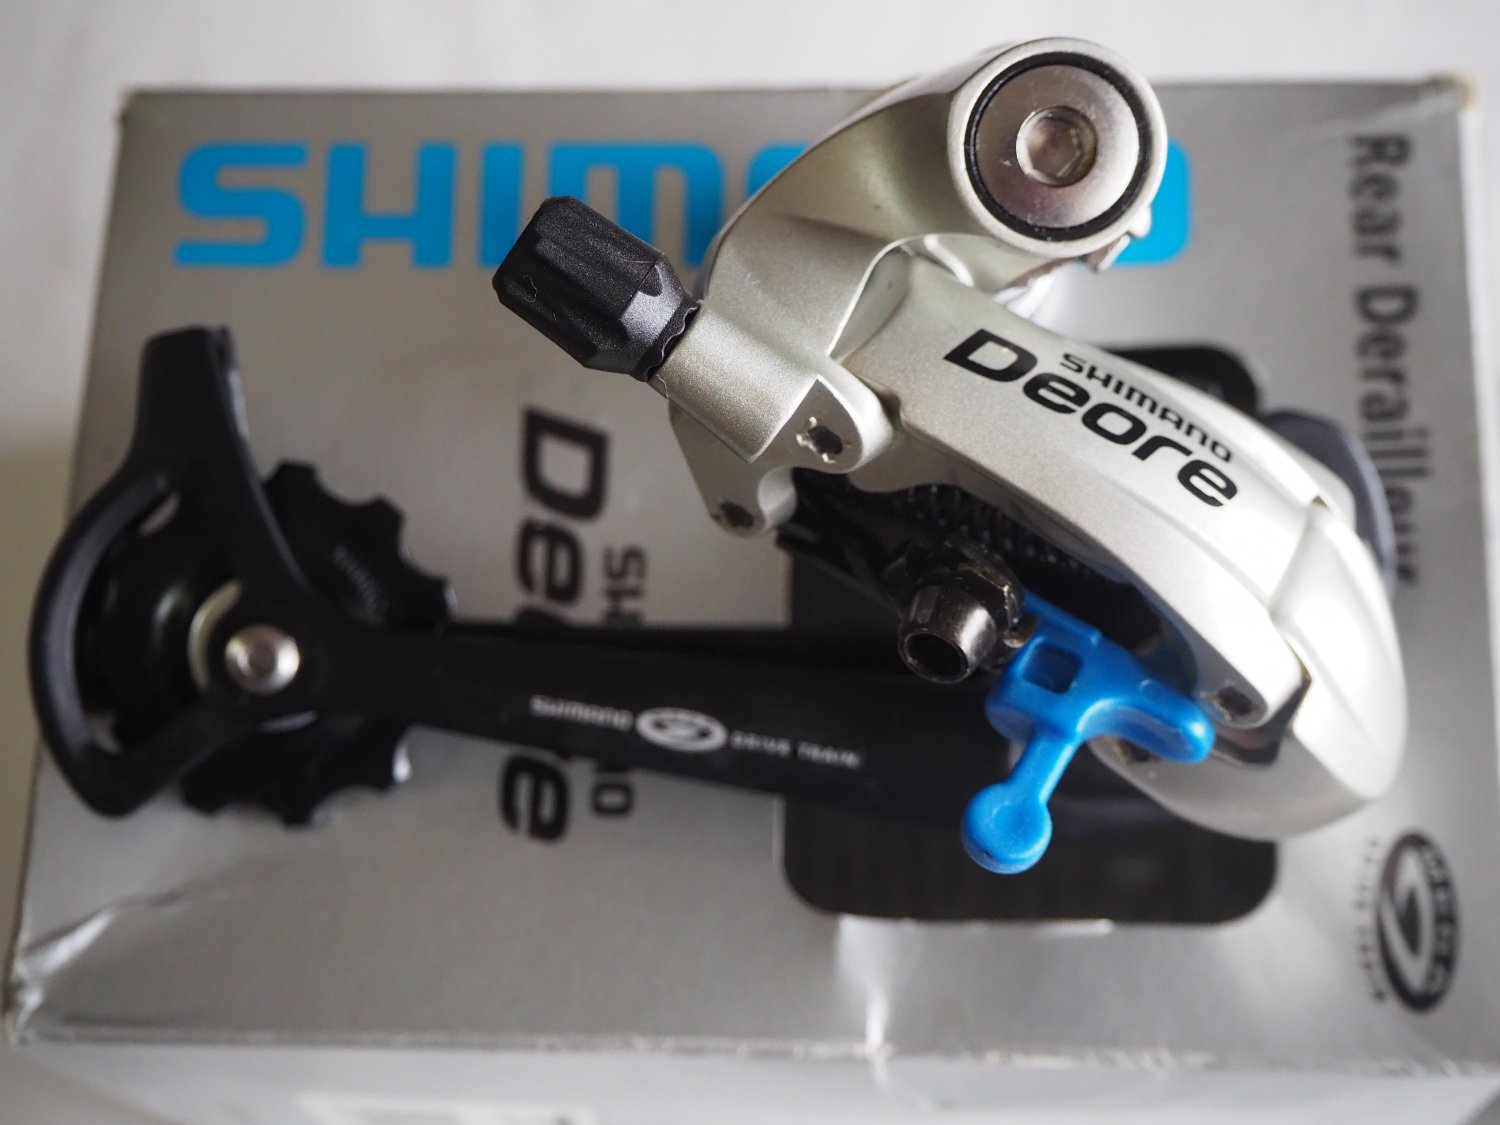 <img class='new_mark_img1' src='https://img.shop-pro.jp/img/new/icons56.gif' style='border:none;display:inline;margin:0px;padding:0px;width:auto;' />SHIMANO DEORE